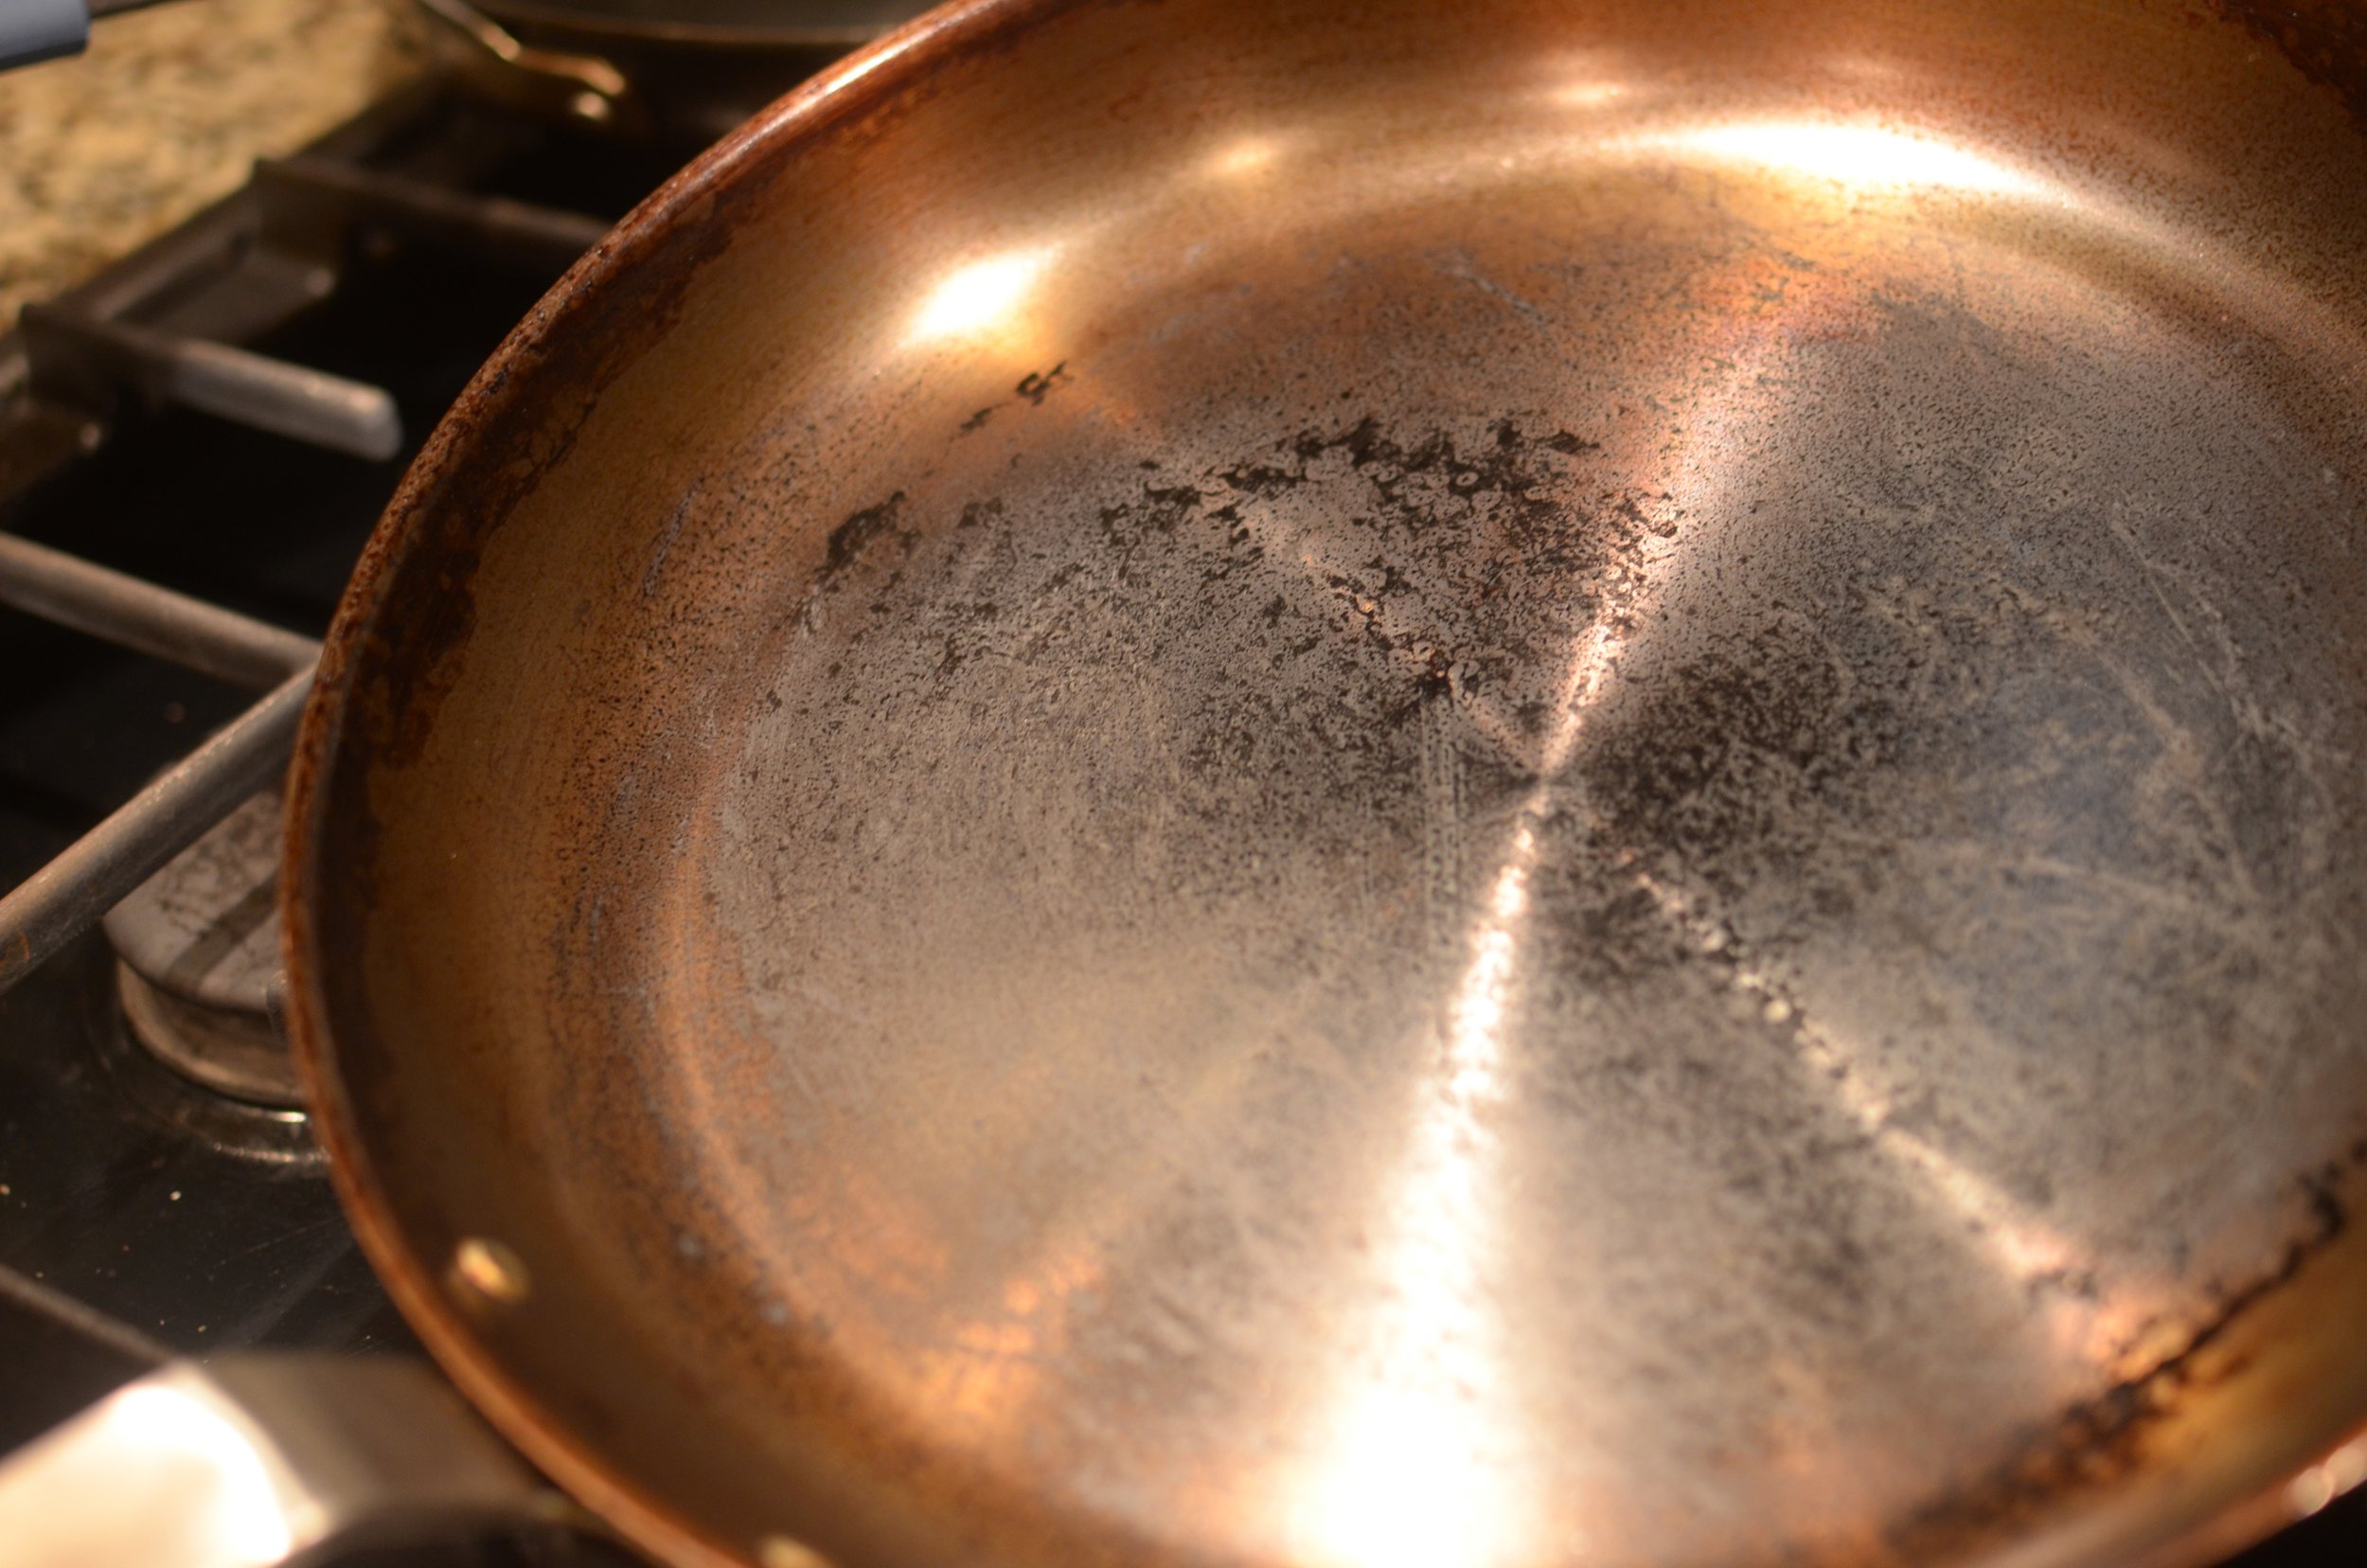 How to Season Carbon Steel Pans